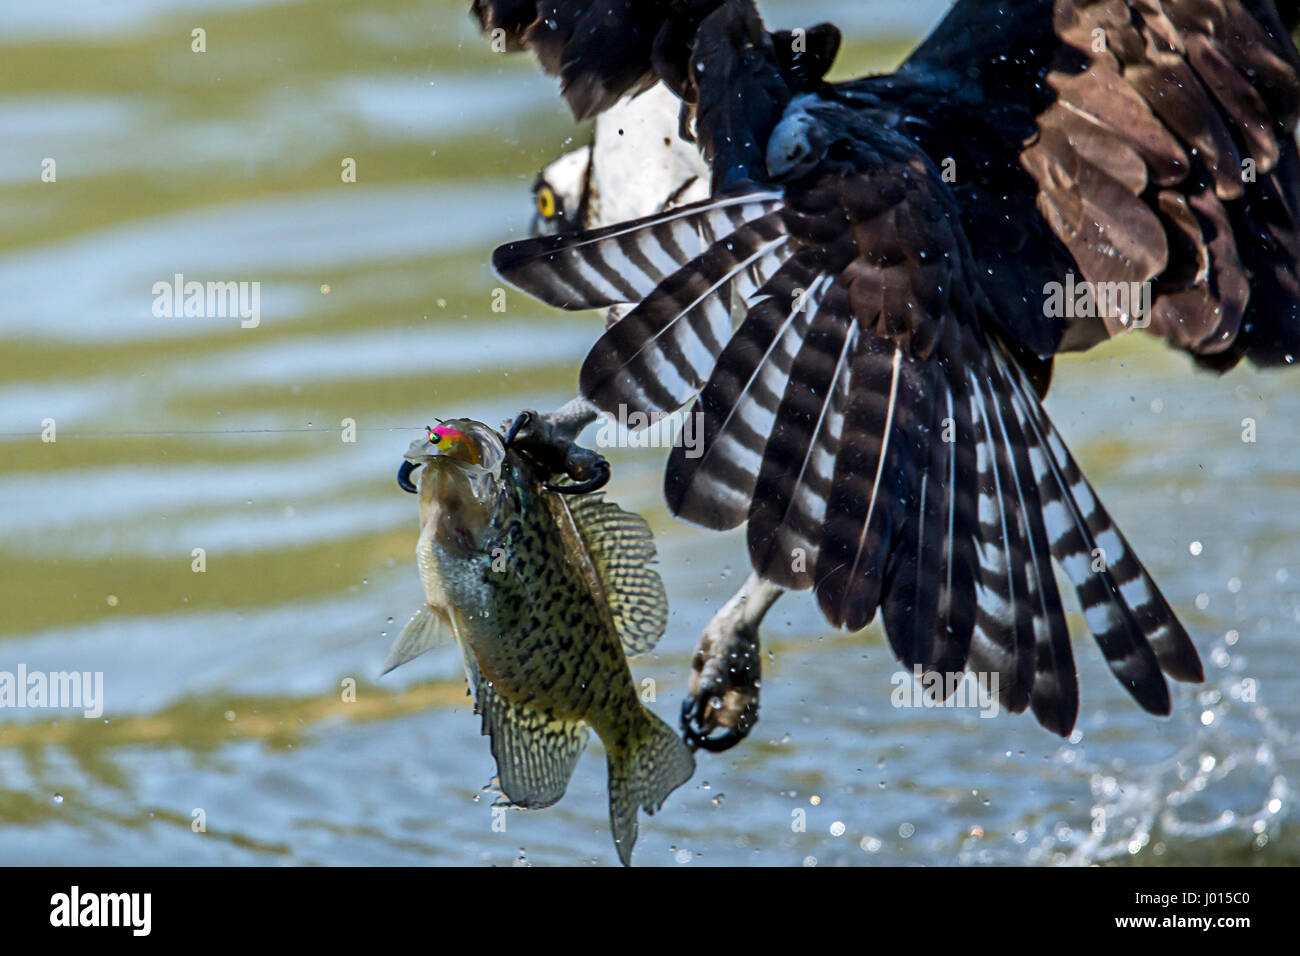 An Osprey tried to grab a crappie that was already hooked by a fisherman at Fernan Lake in north Idaho. Stock Photo